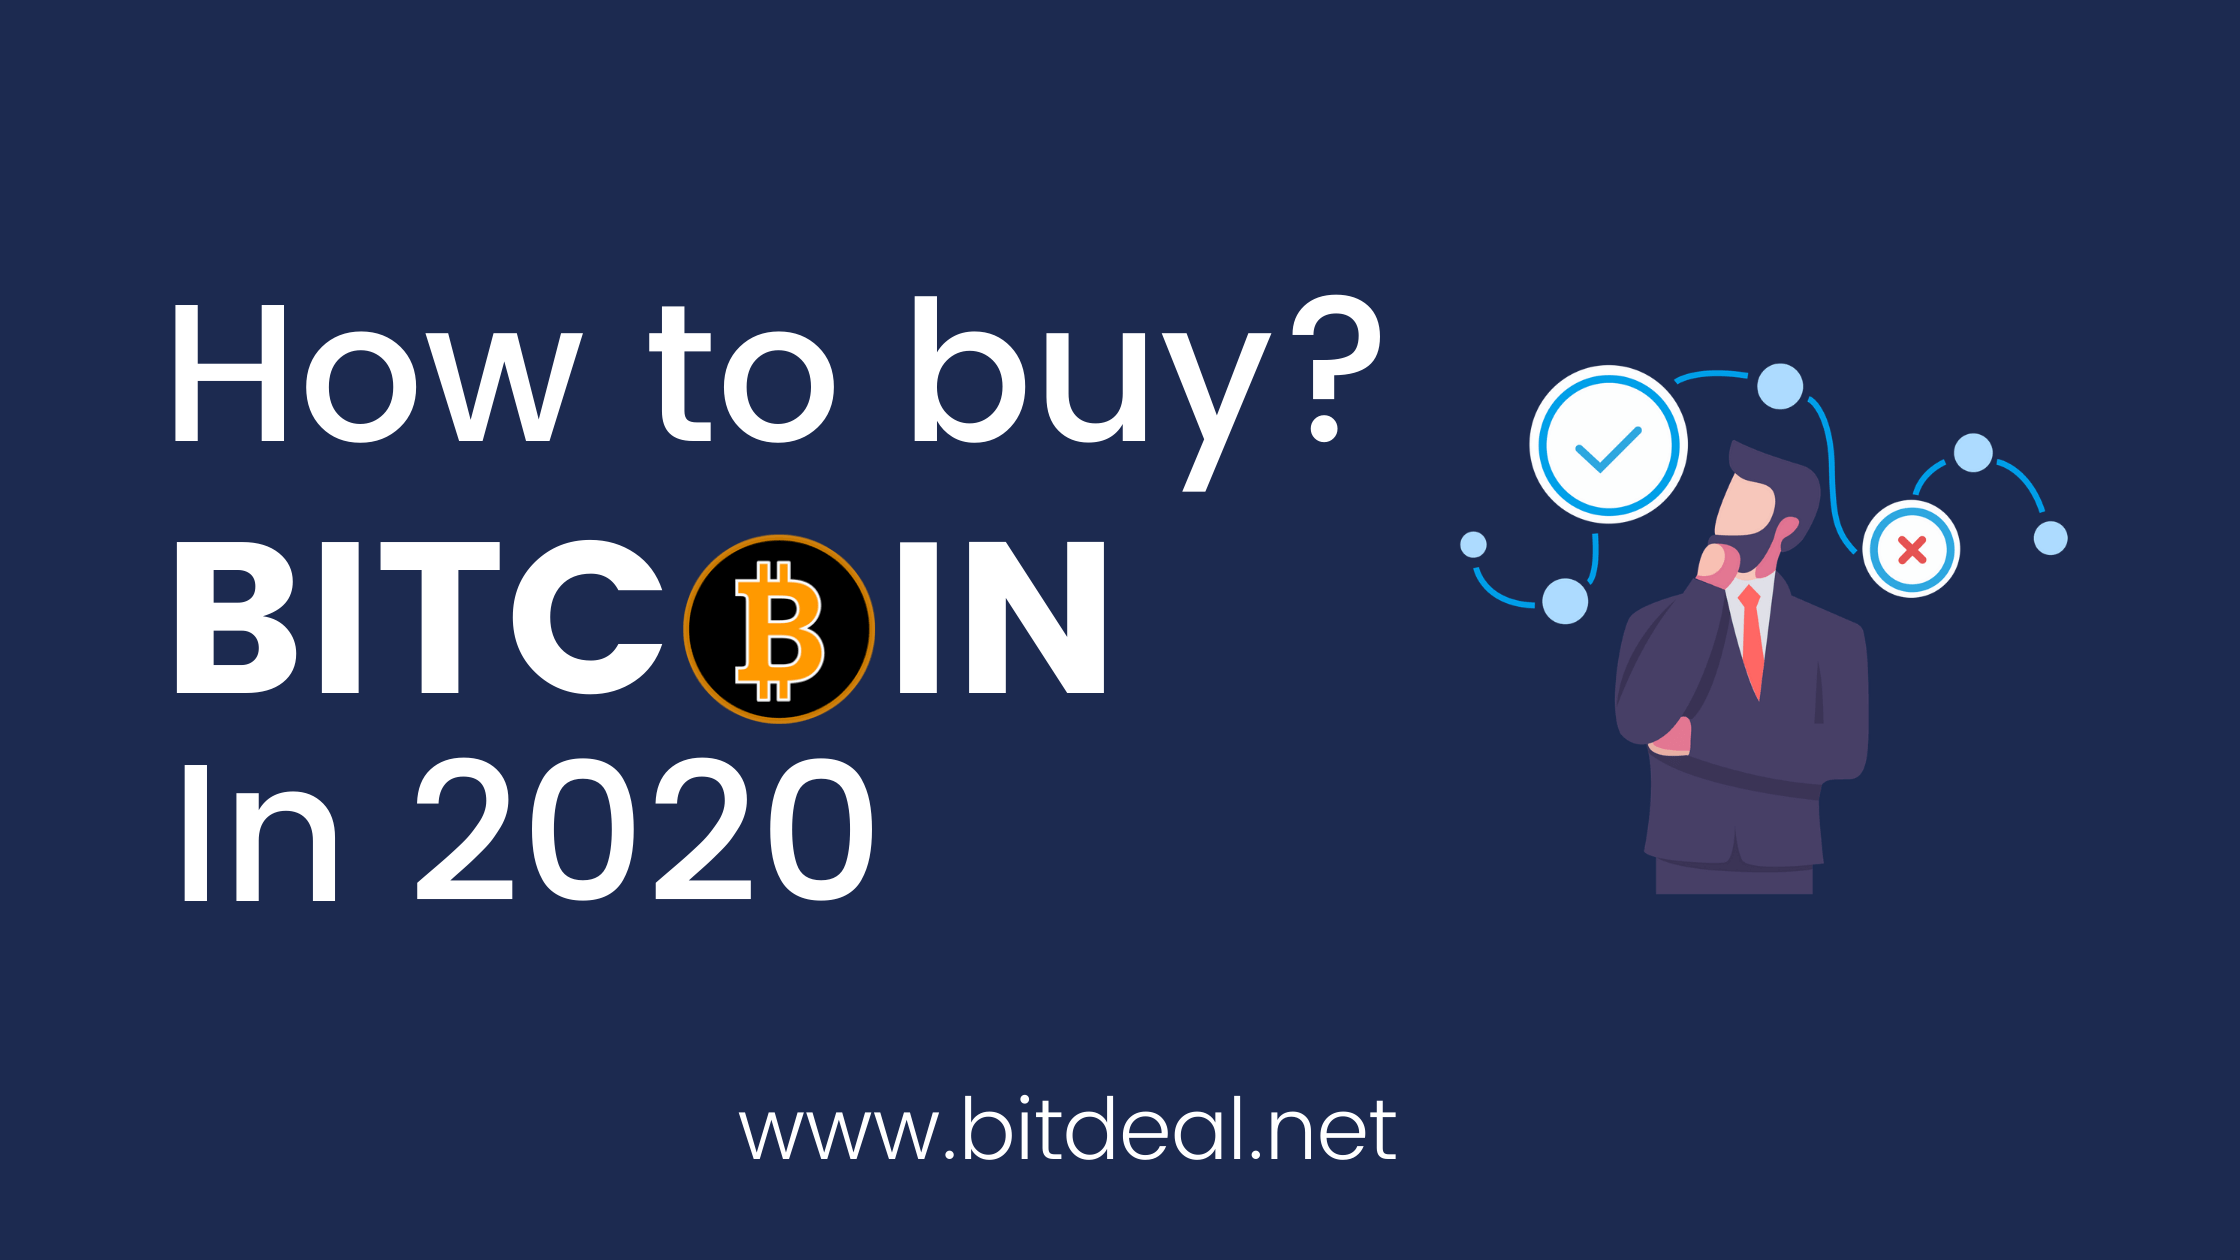 How To Legally Buy or Invest in Bitcoin - A 2020 Guide